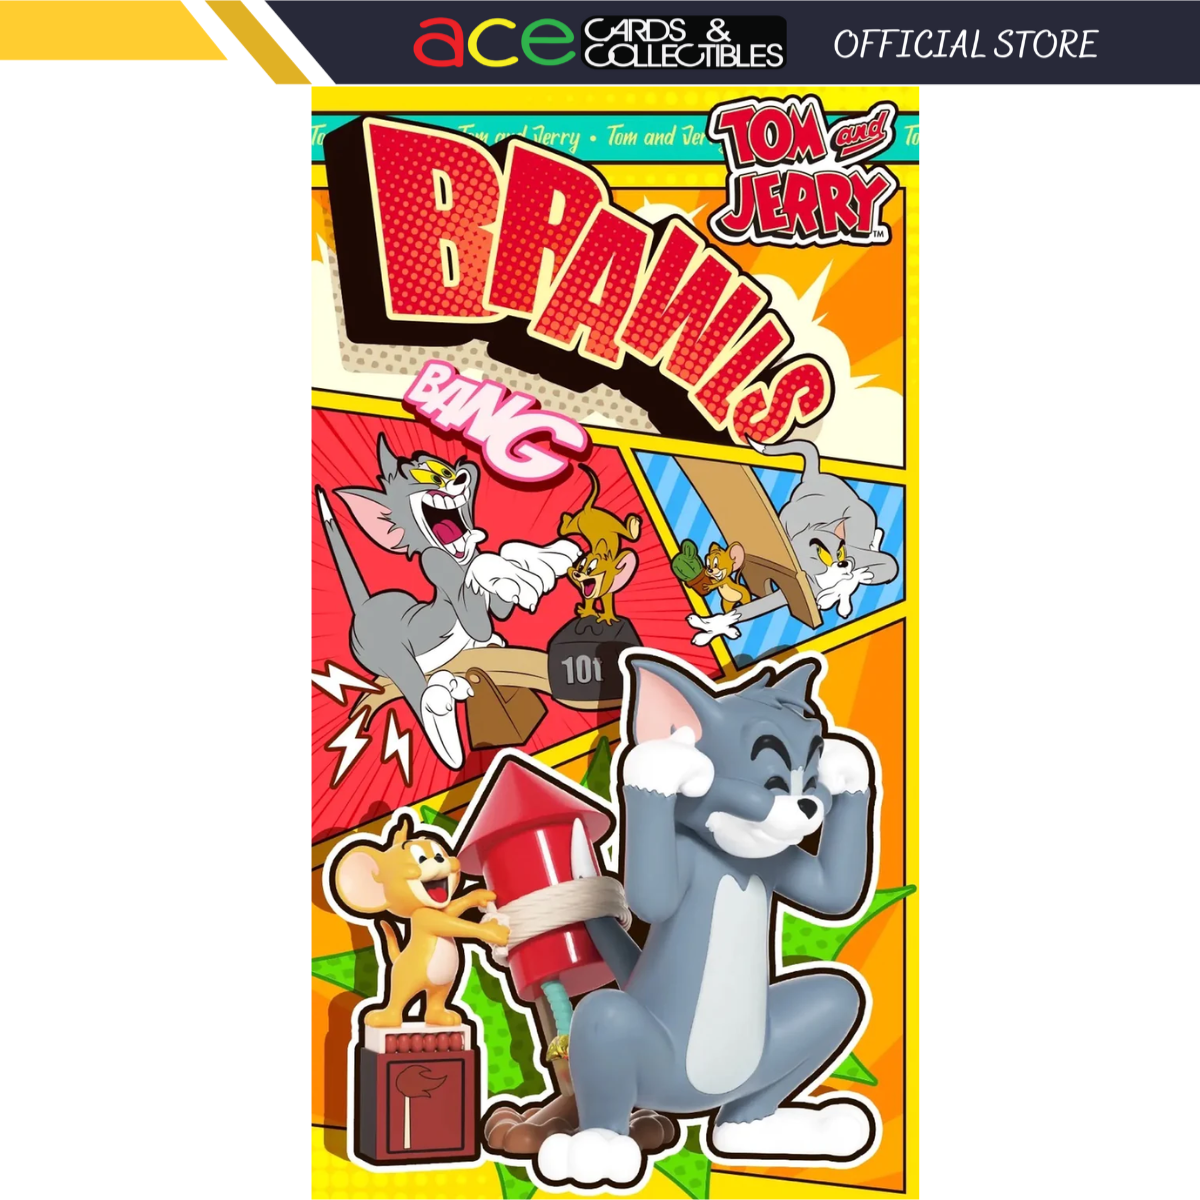 52Toys x Tom And Jerry Brawls Series-Single Box (Random)-52Toys-Ace Cards & Collectibles